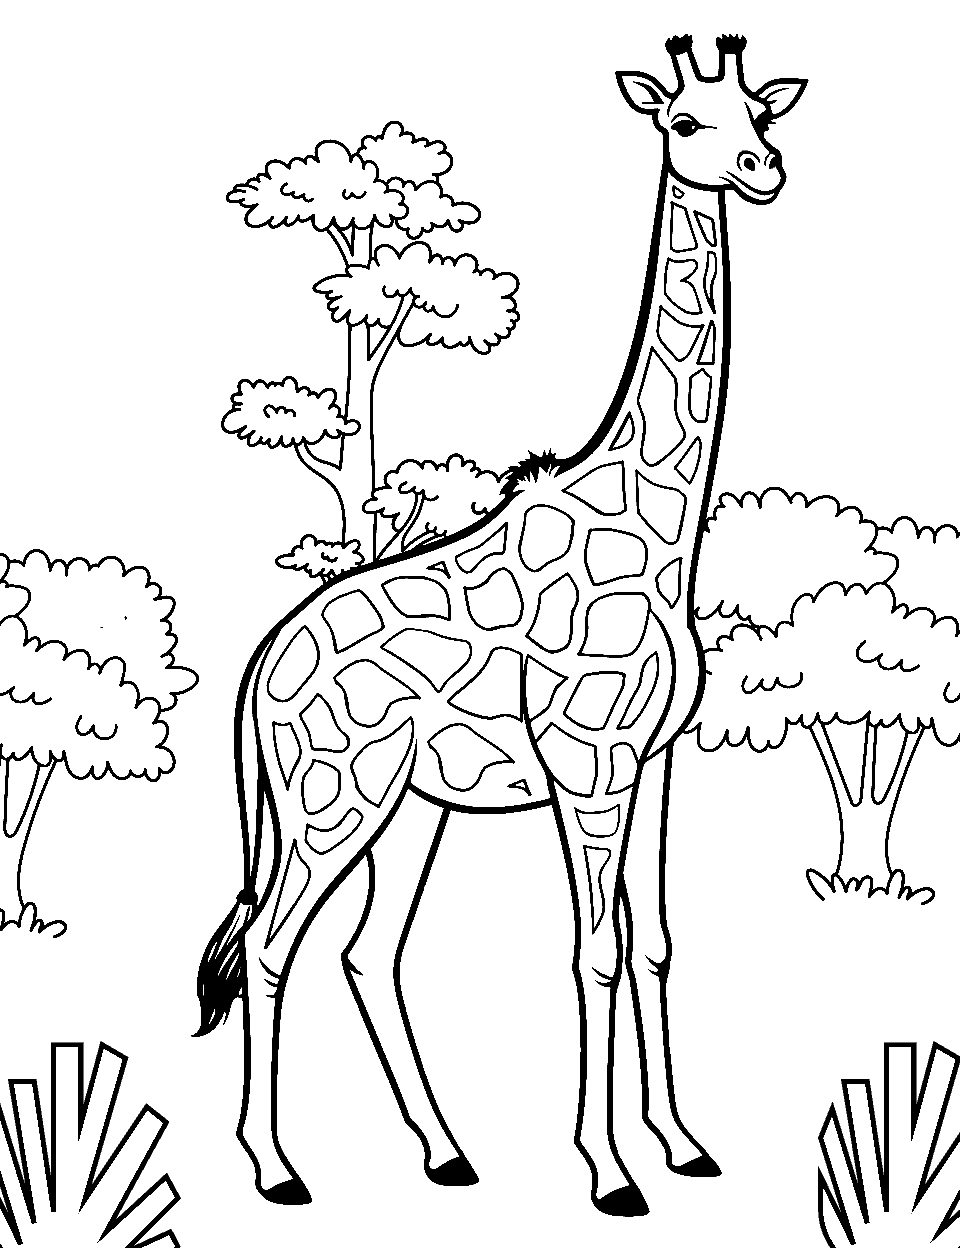 30 Giraffe Coloring Pages: Free Printable Sheets